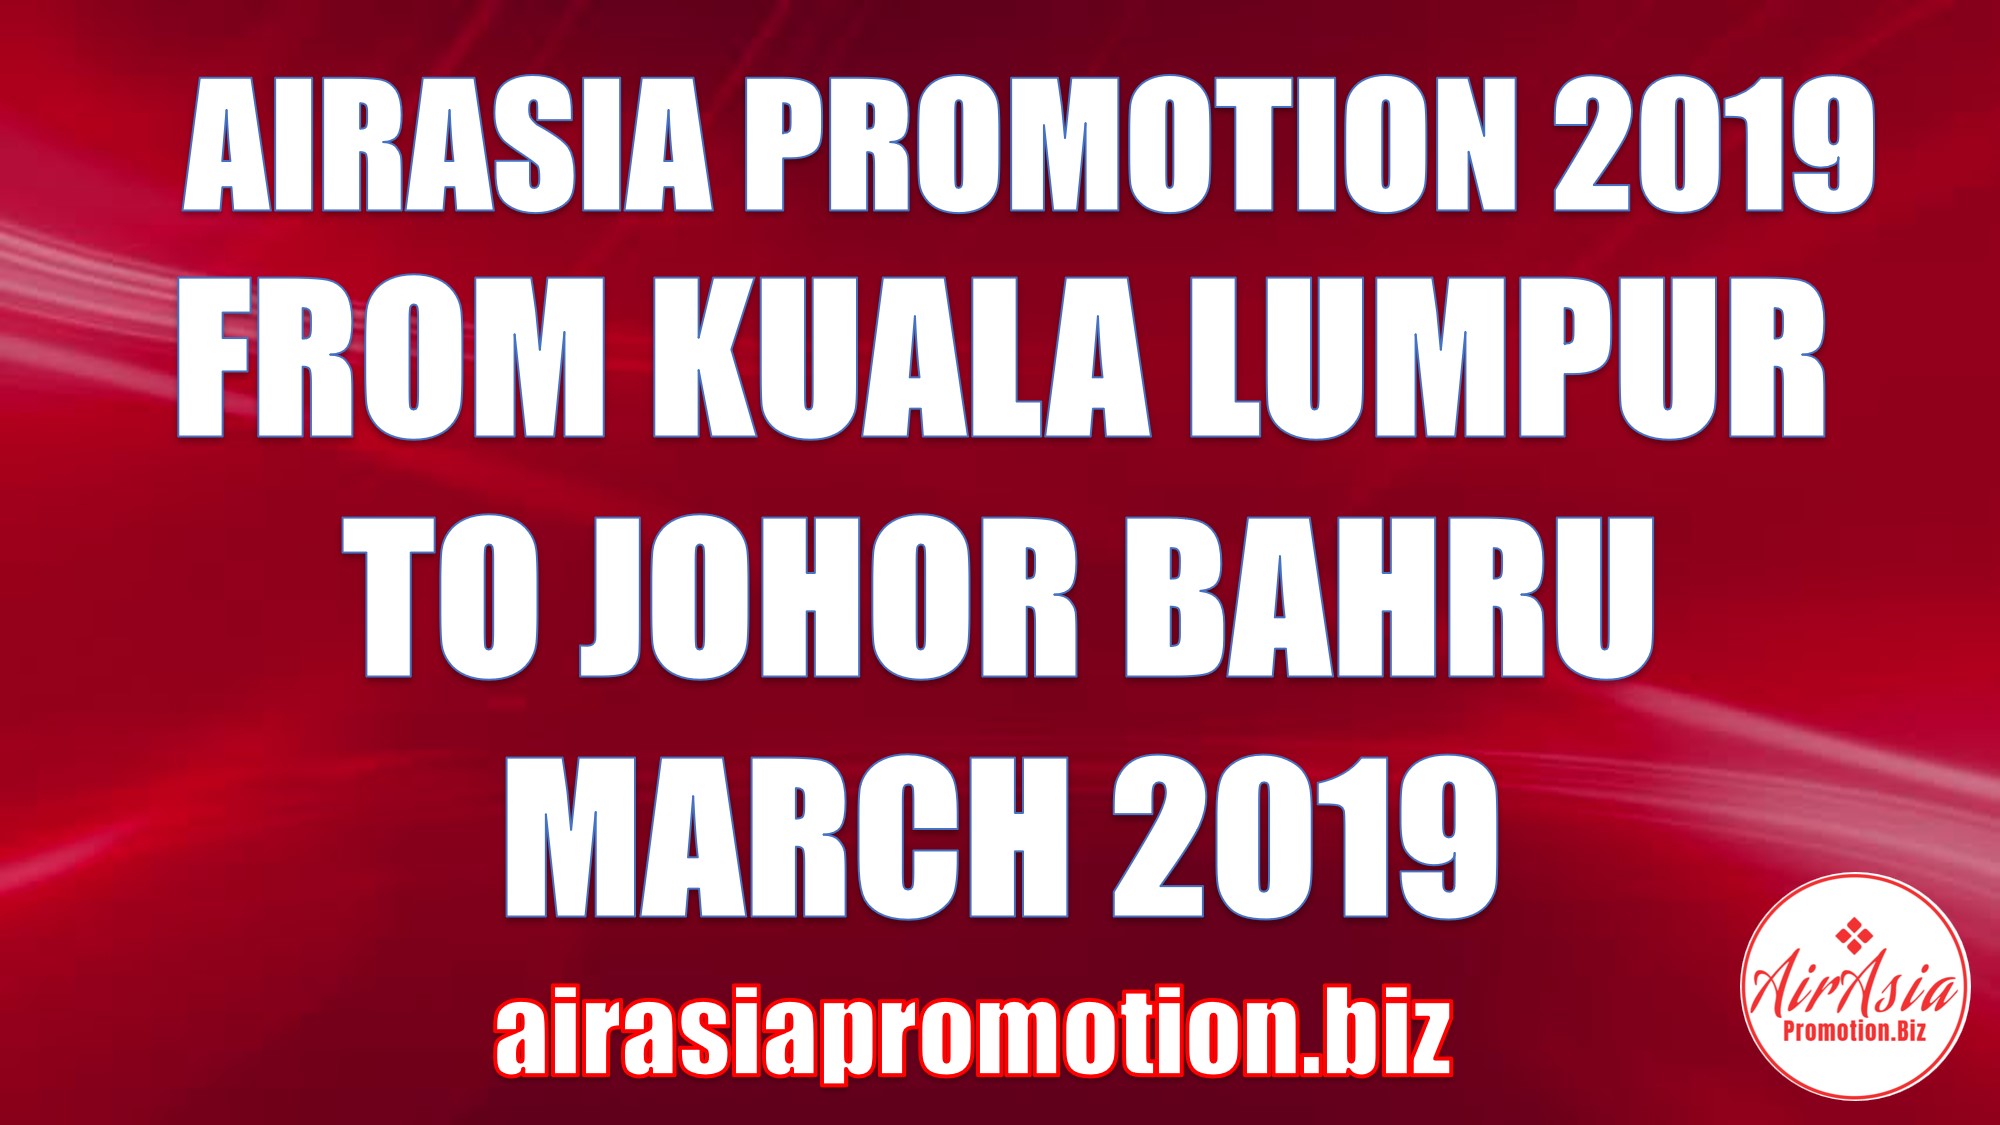 AirAsia Promotion From Kuala Lumpur To Johor Bahru In March 2019